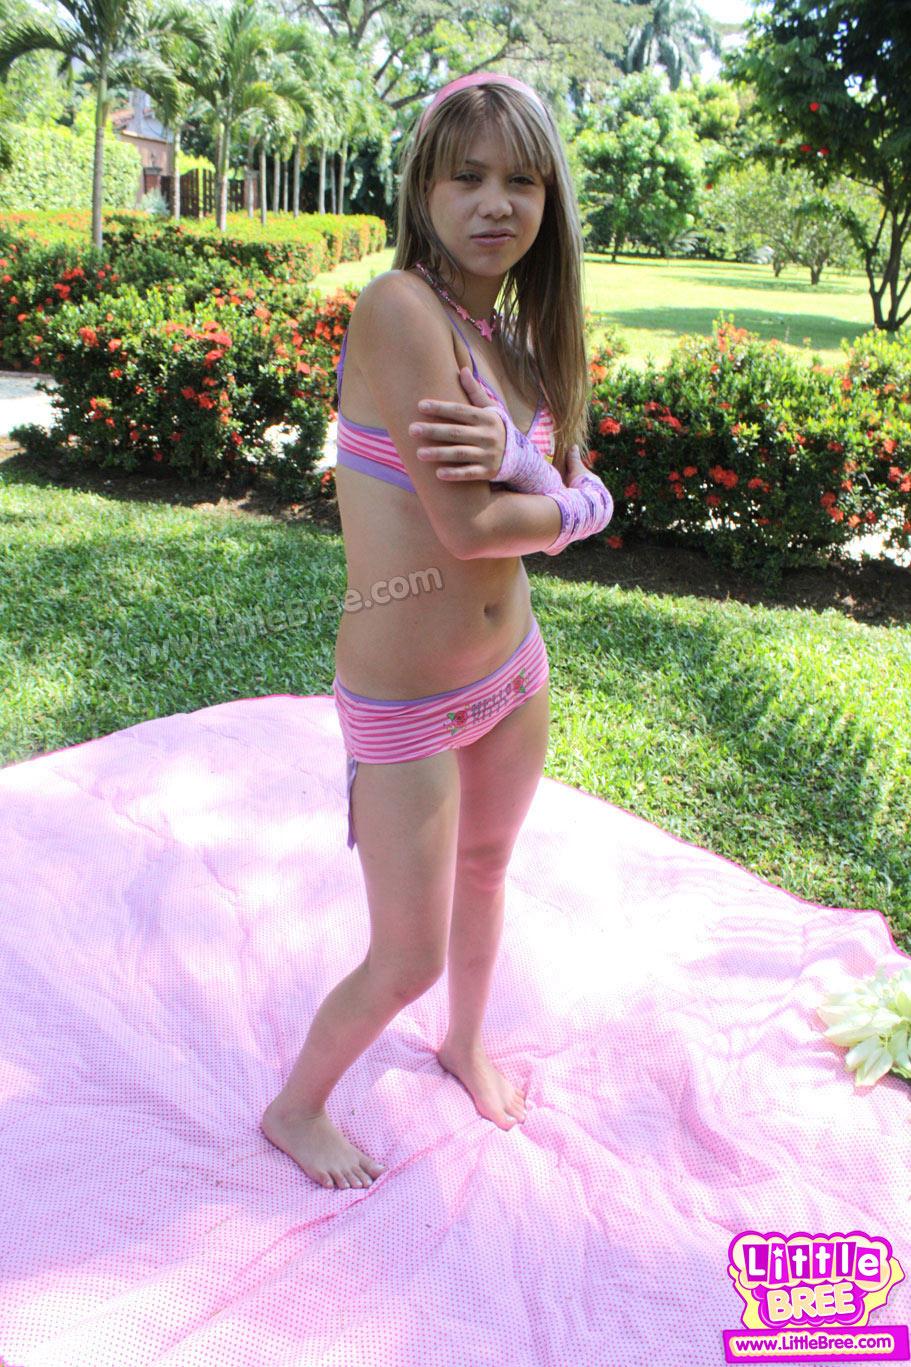 Pictures of Little Bree nude in the back yard #58996113